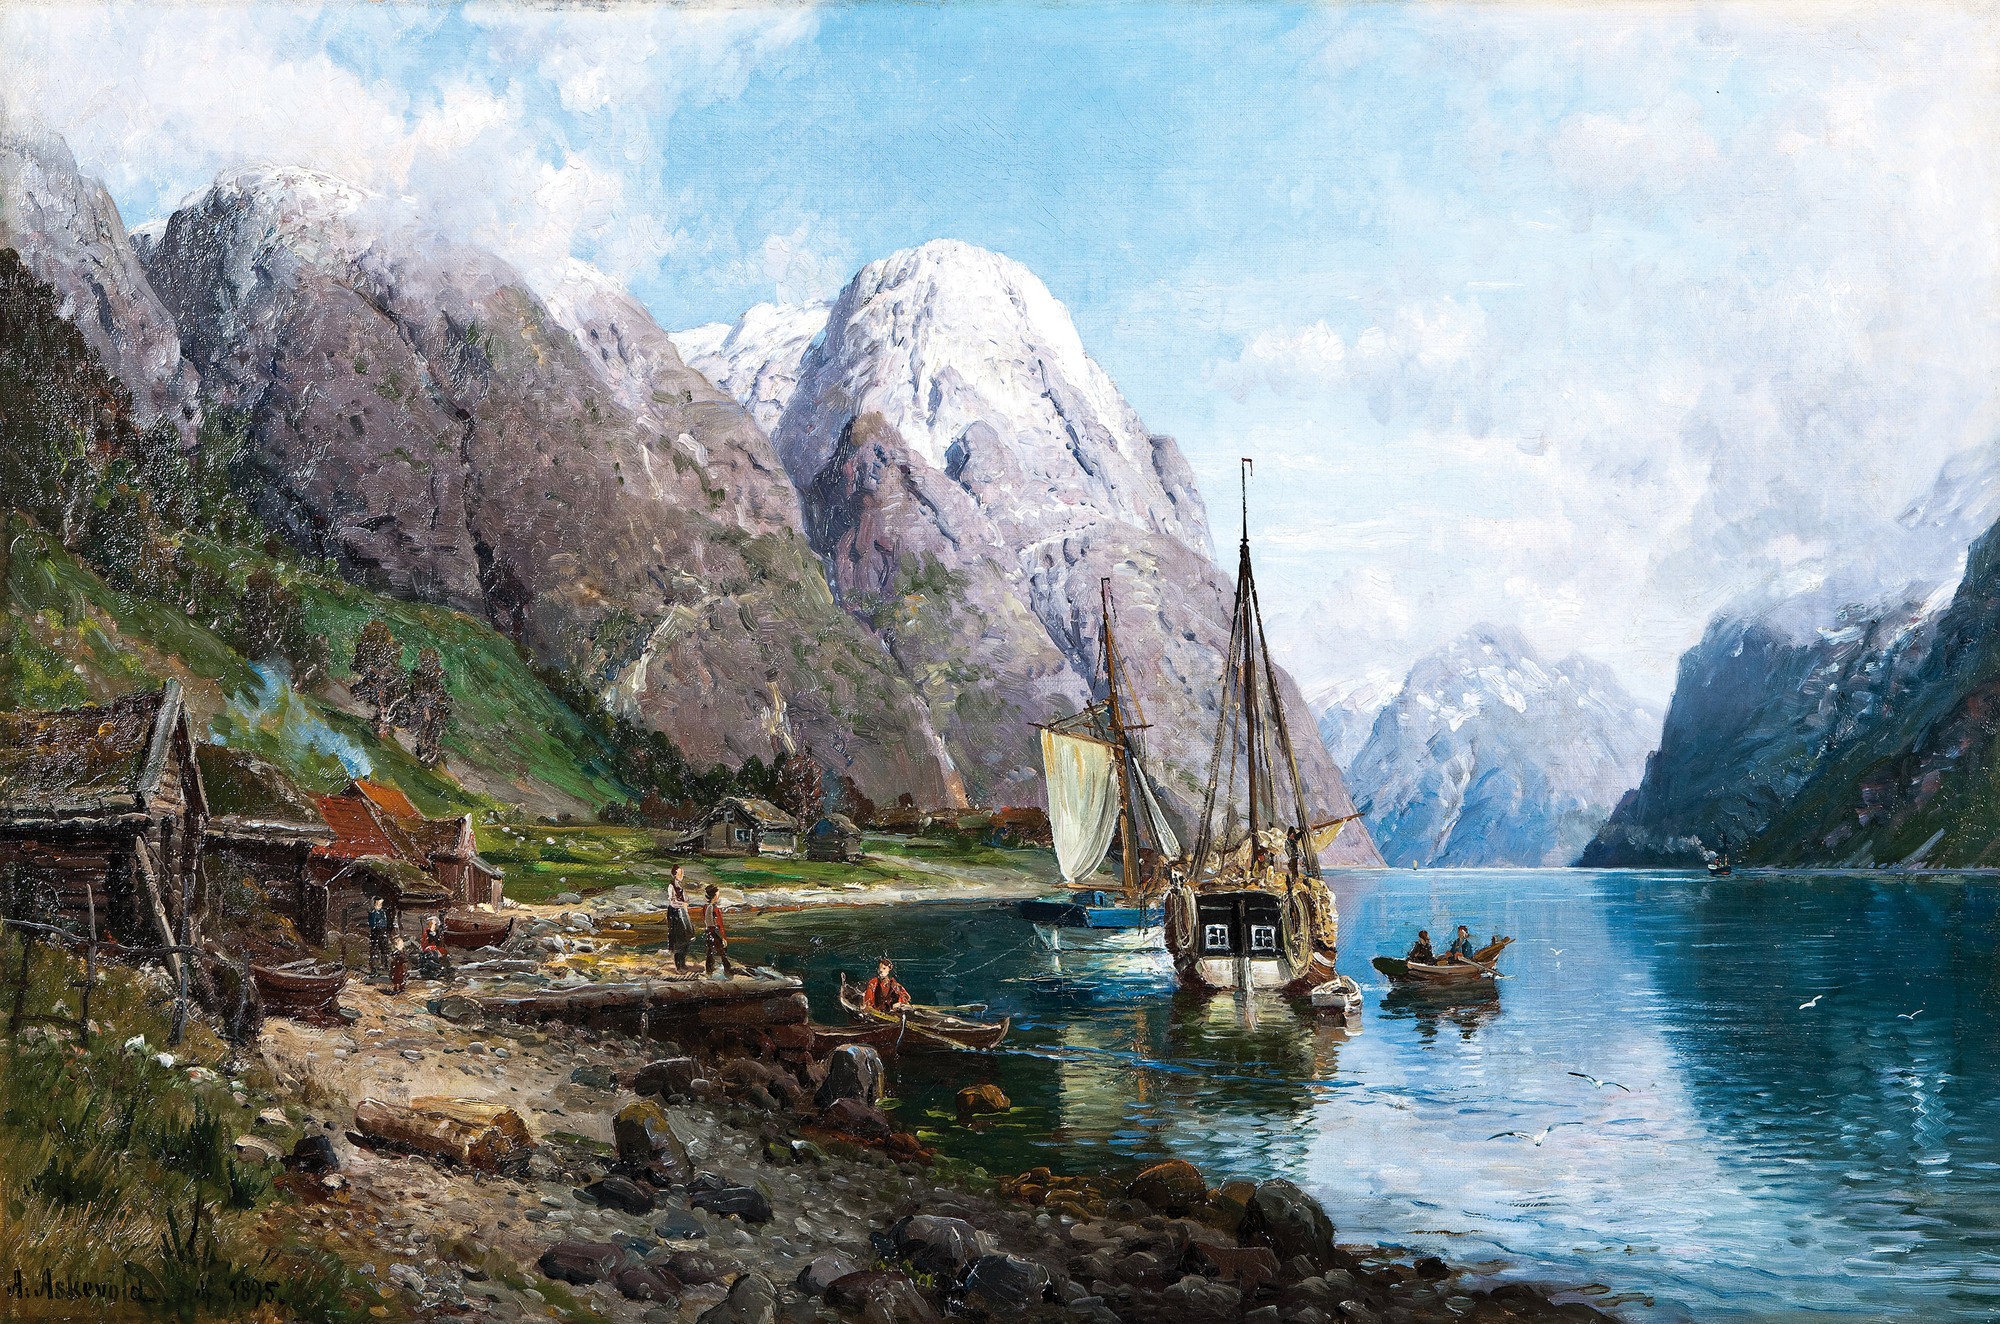 Anders Askevold, People, Artwork, Painting, Classic art, Traditional art, Norway, Nature, Landscape, Ship, Sailing ship, Boat, Mountains, Lake, House, Clouds, Snowy peak Wallpaper